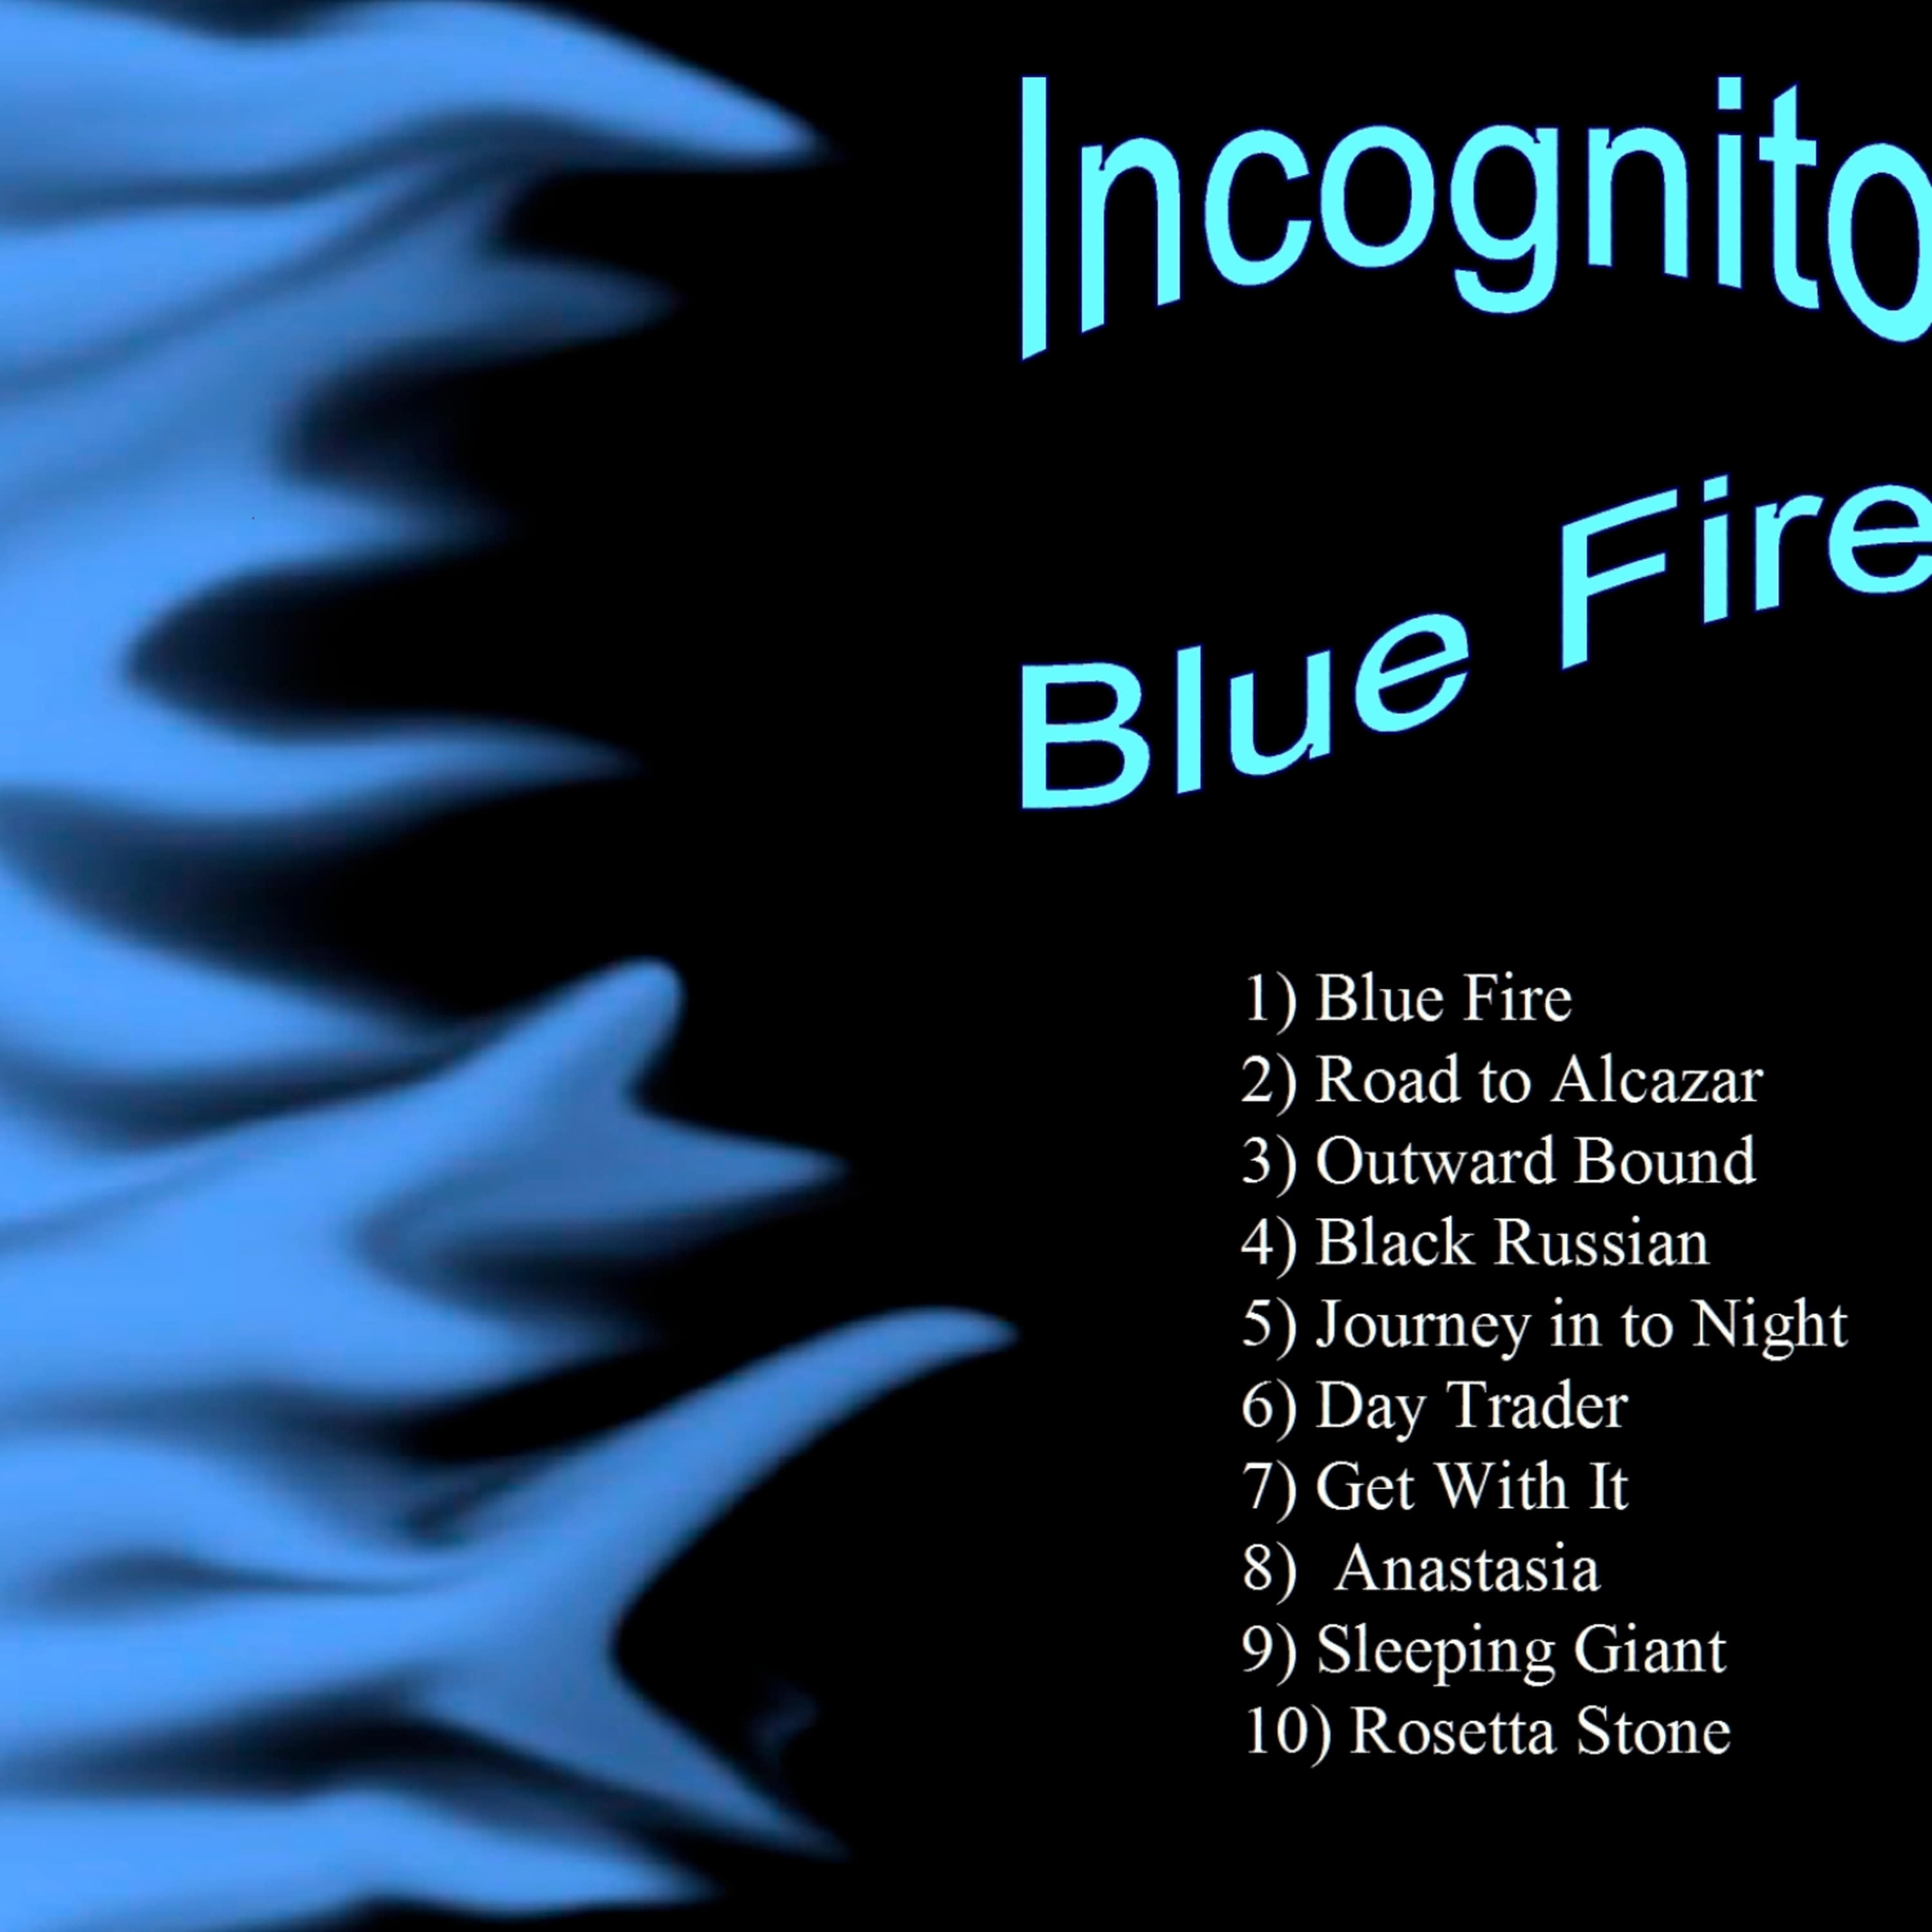 Incognito-Get with It